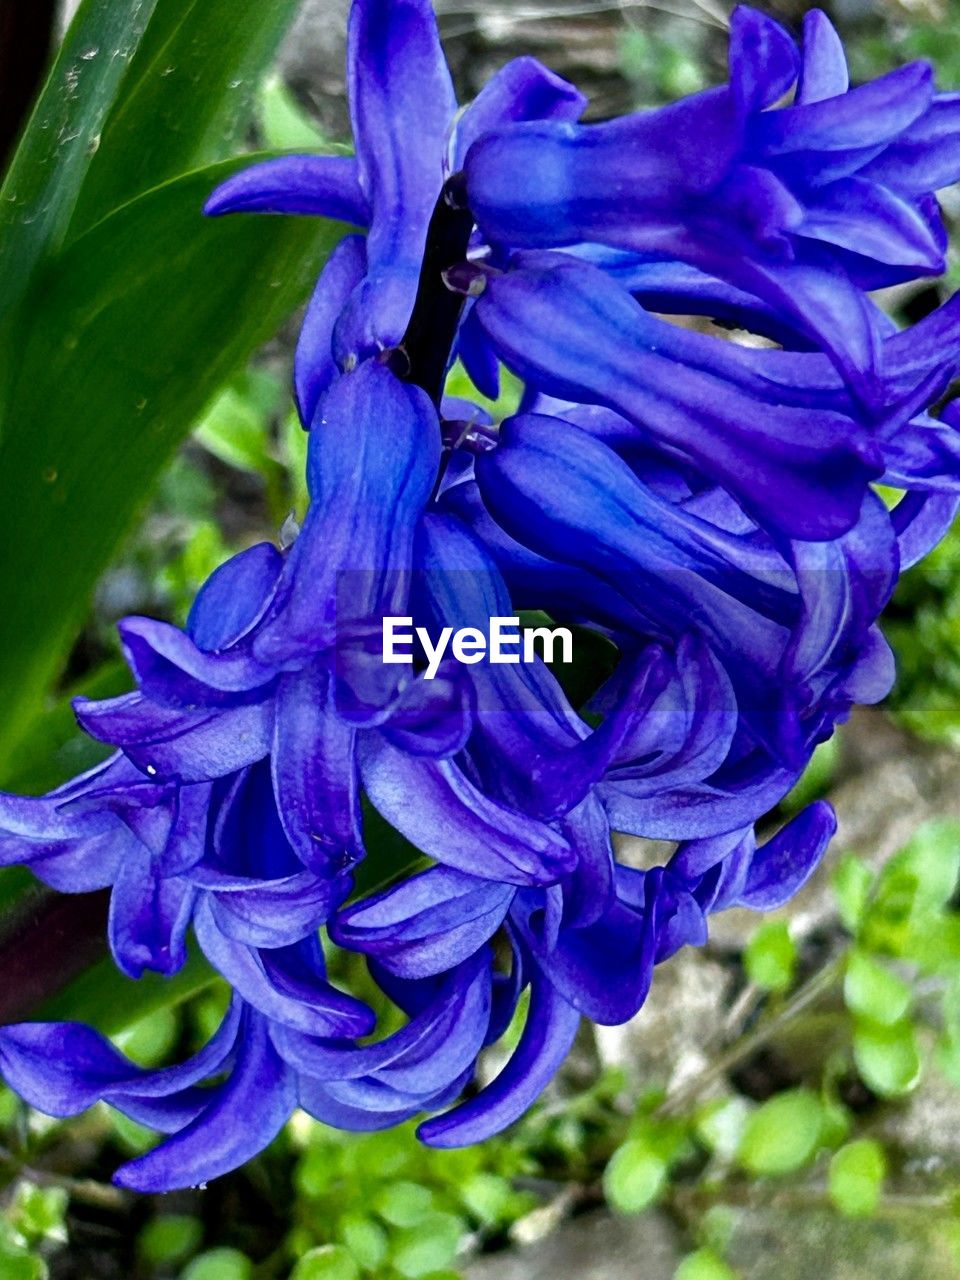 flower, plant, flowering plant, purple, beauty in nature, close-up, growth, freshness, fragility, petal, nature, inflorescence, flower head, blue, no people, day, plant part, botany, focus on foreground, outdoors, iris, leaf, water, springtime, blossom